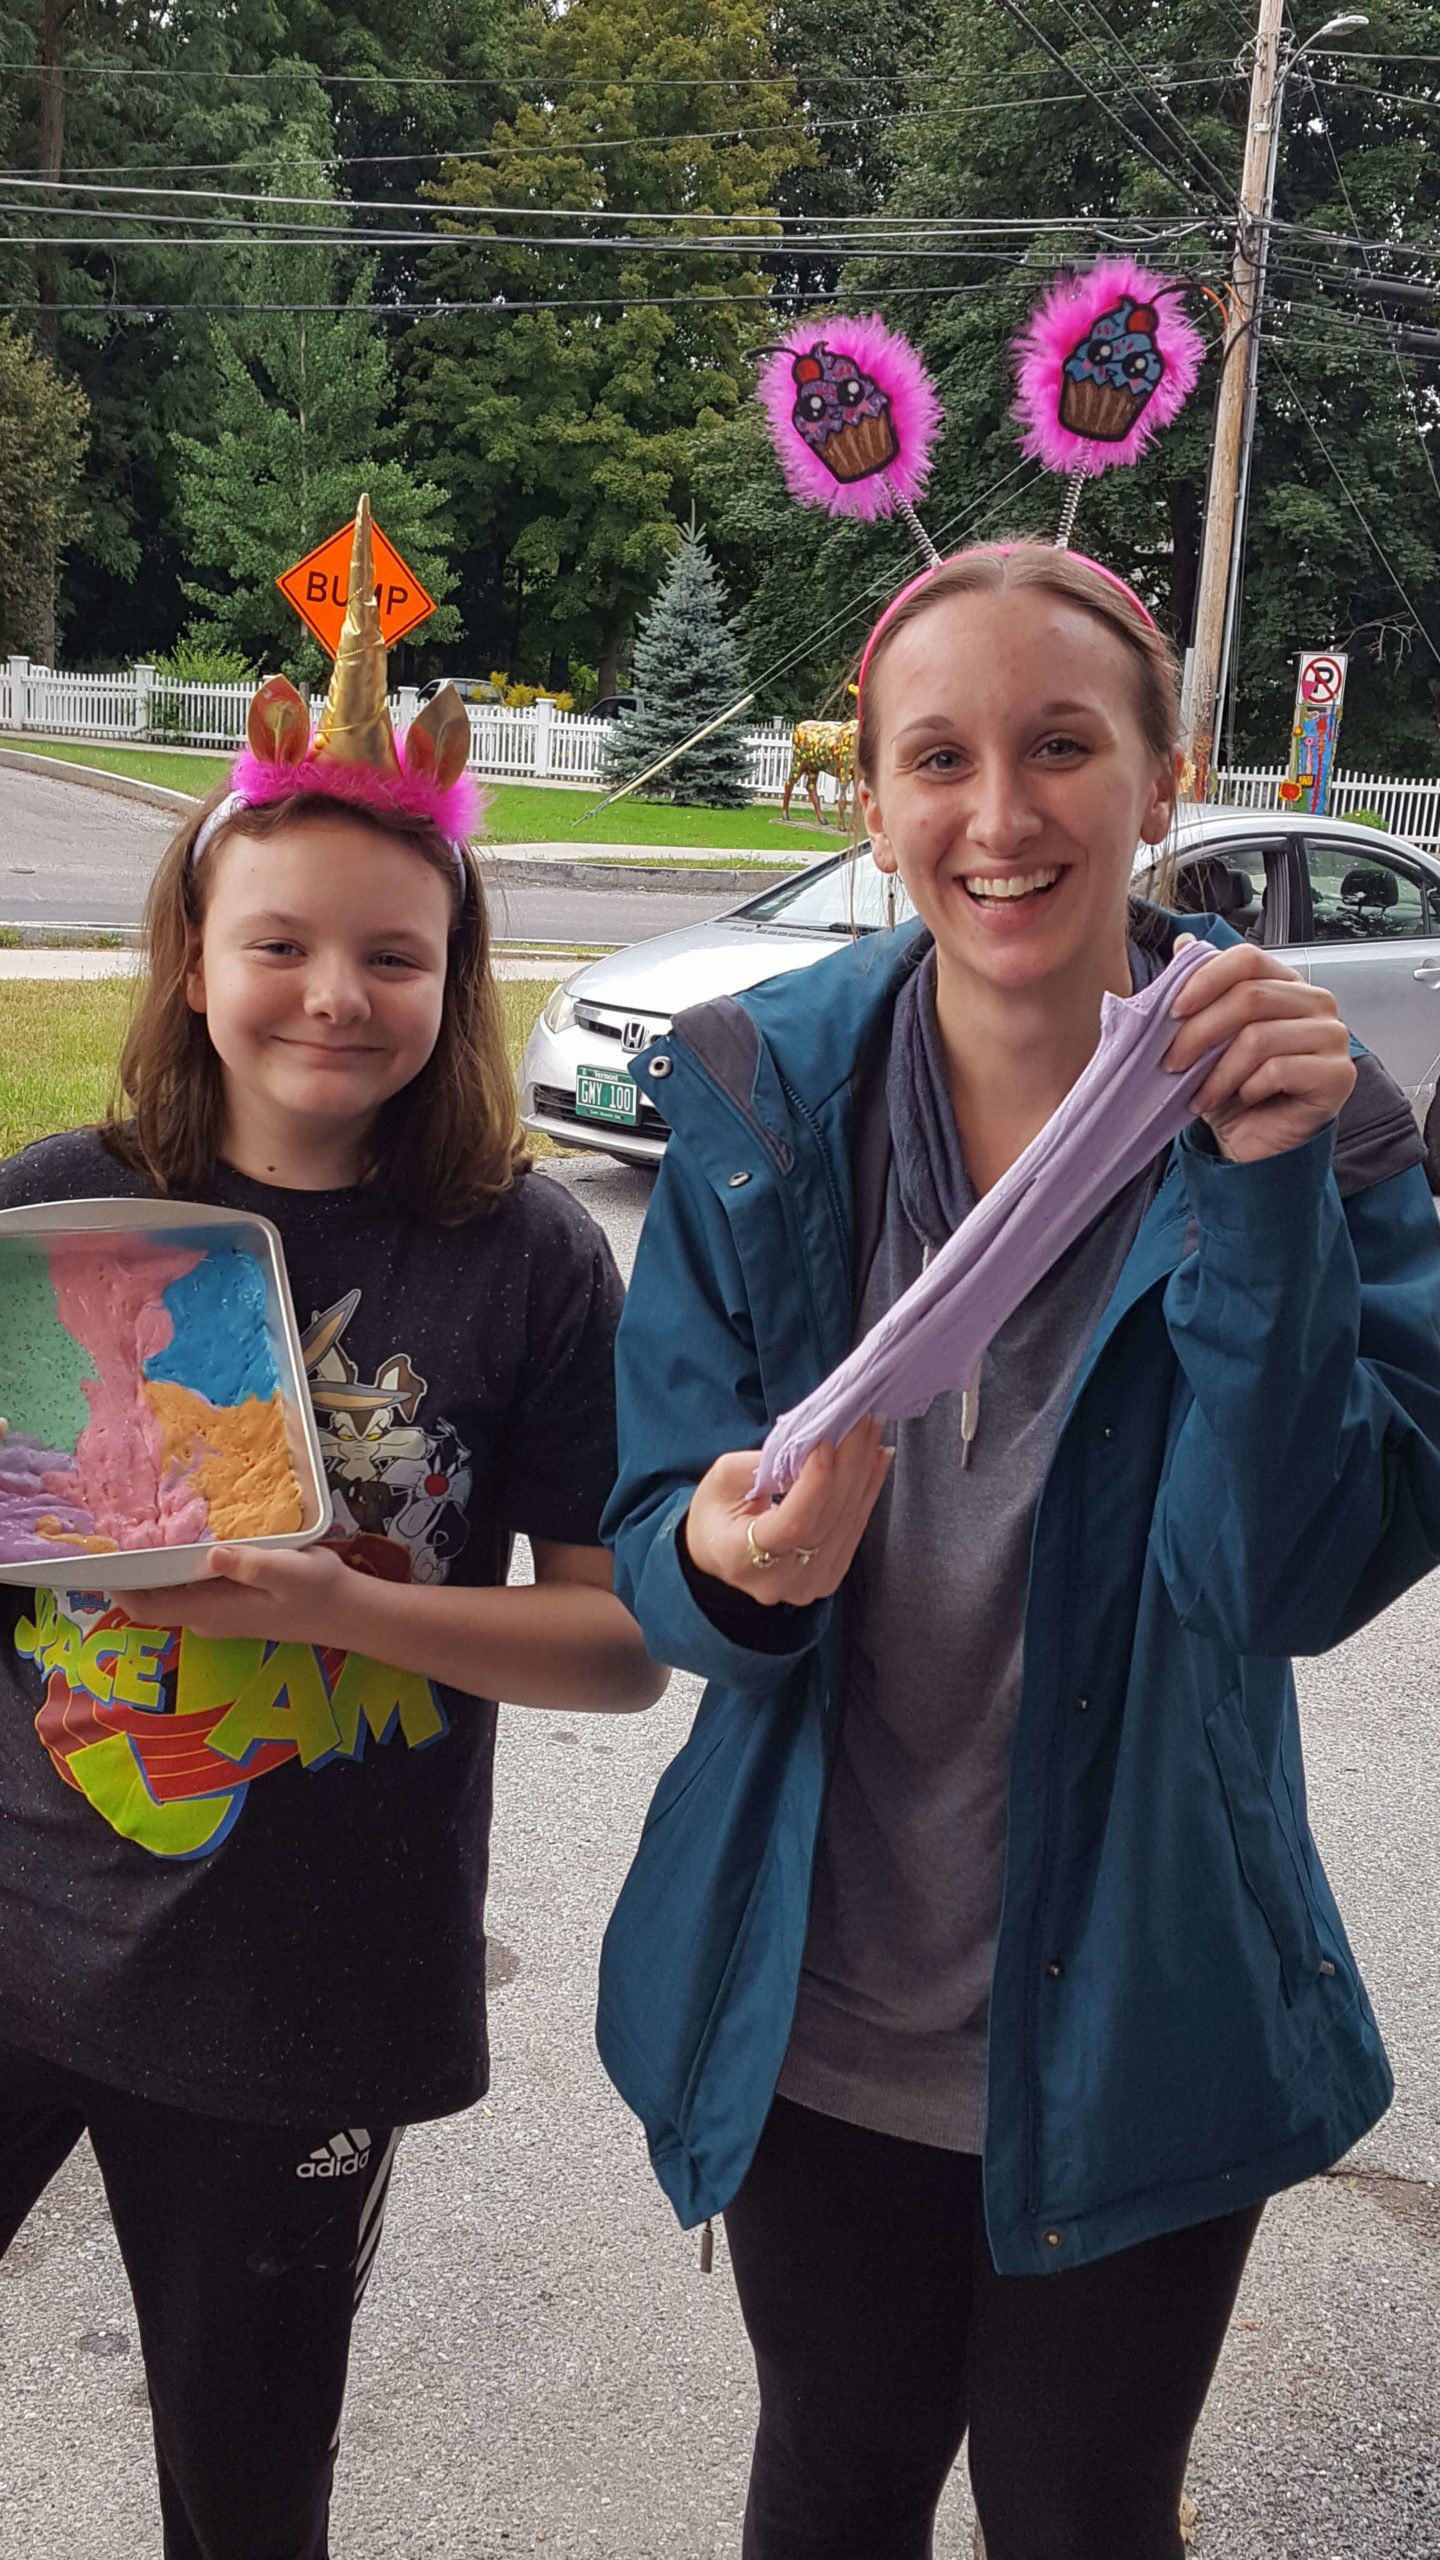 two girls smiling wearing silly head bands. One has a unicorn horn and the other has cupcake ears